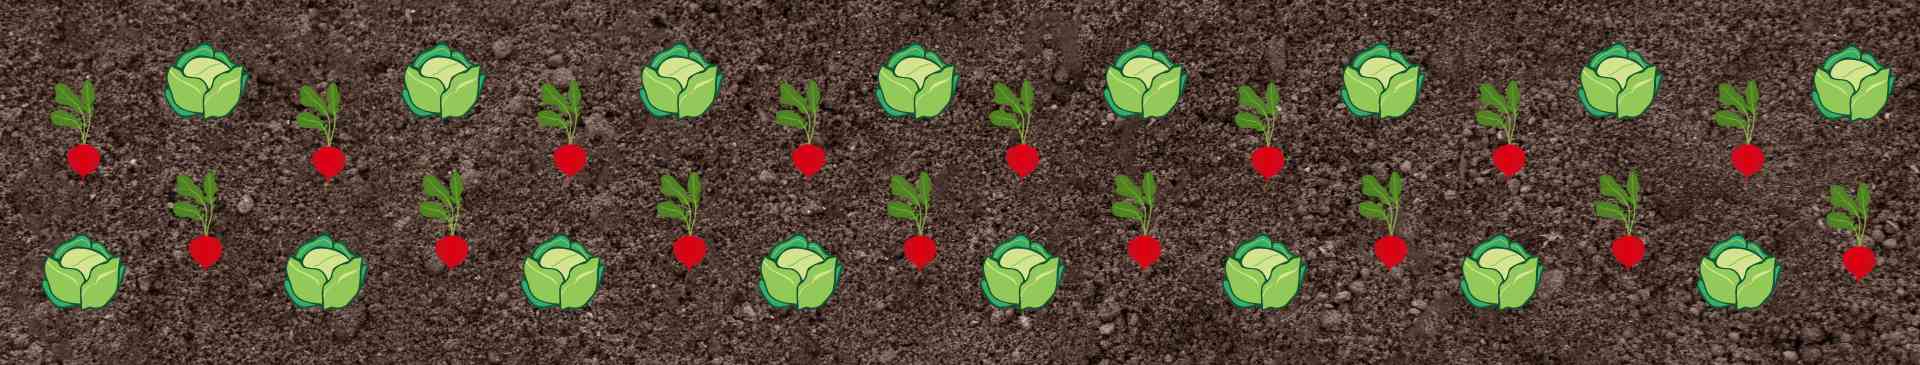 Spacing Matters: Why Vegetable Plants Need to Keep Their Distance